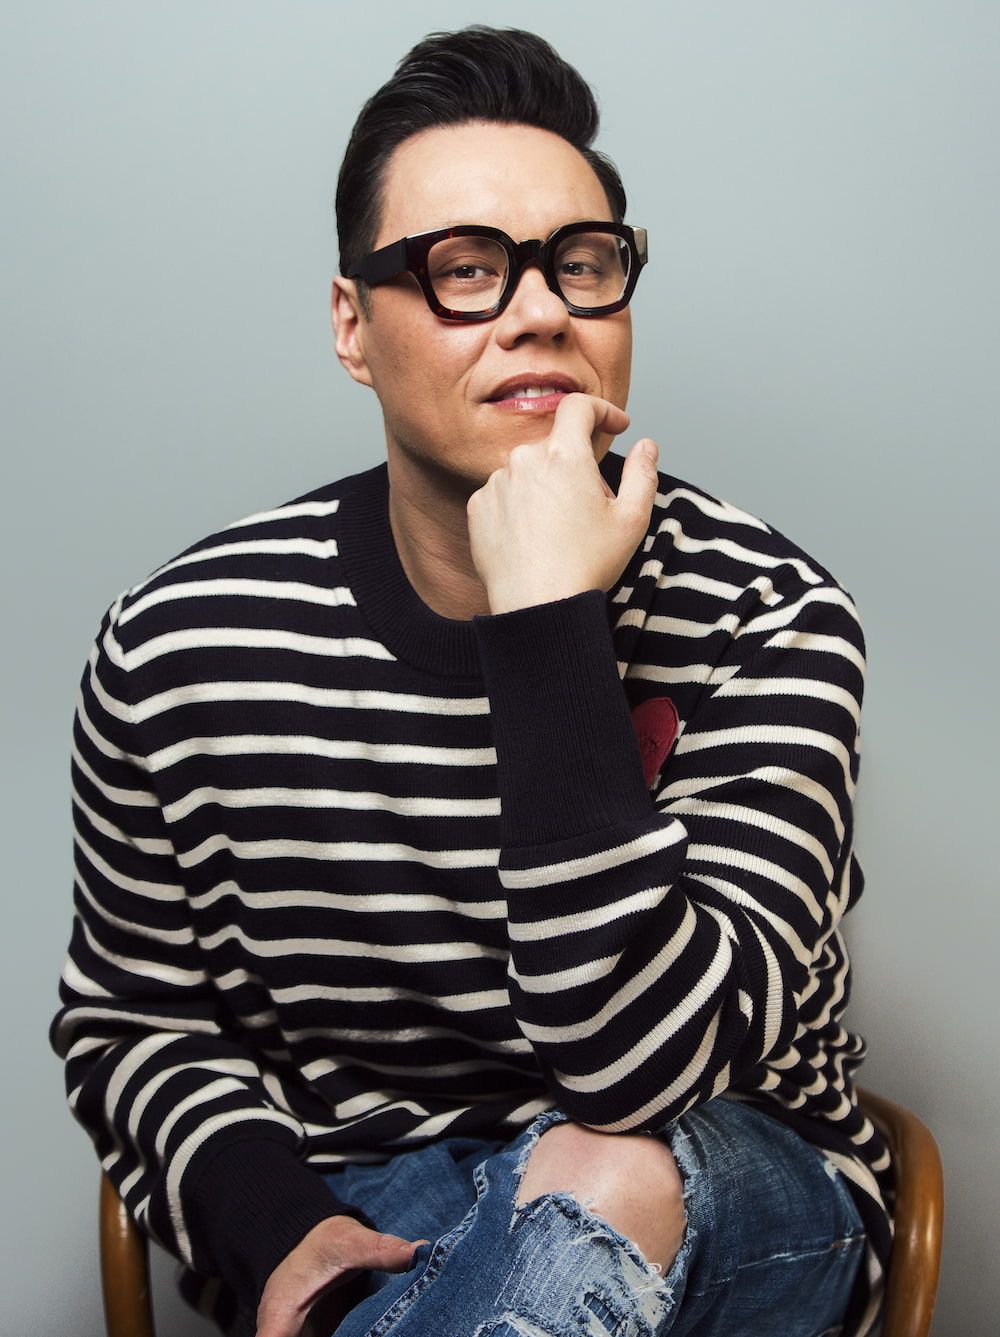 Gok Wan sitting in a chair with his chin resting on his hand